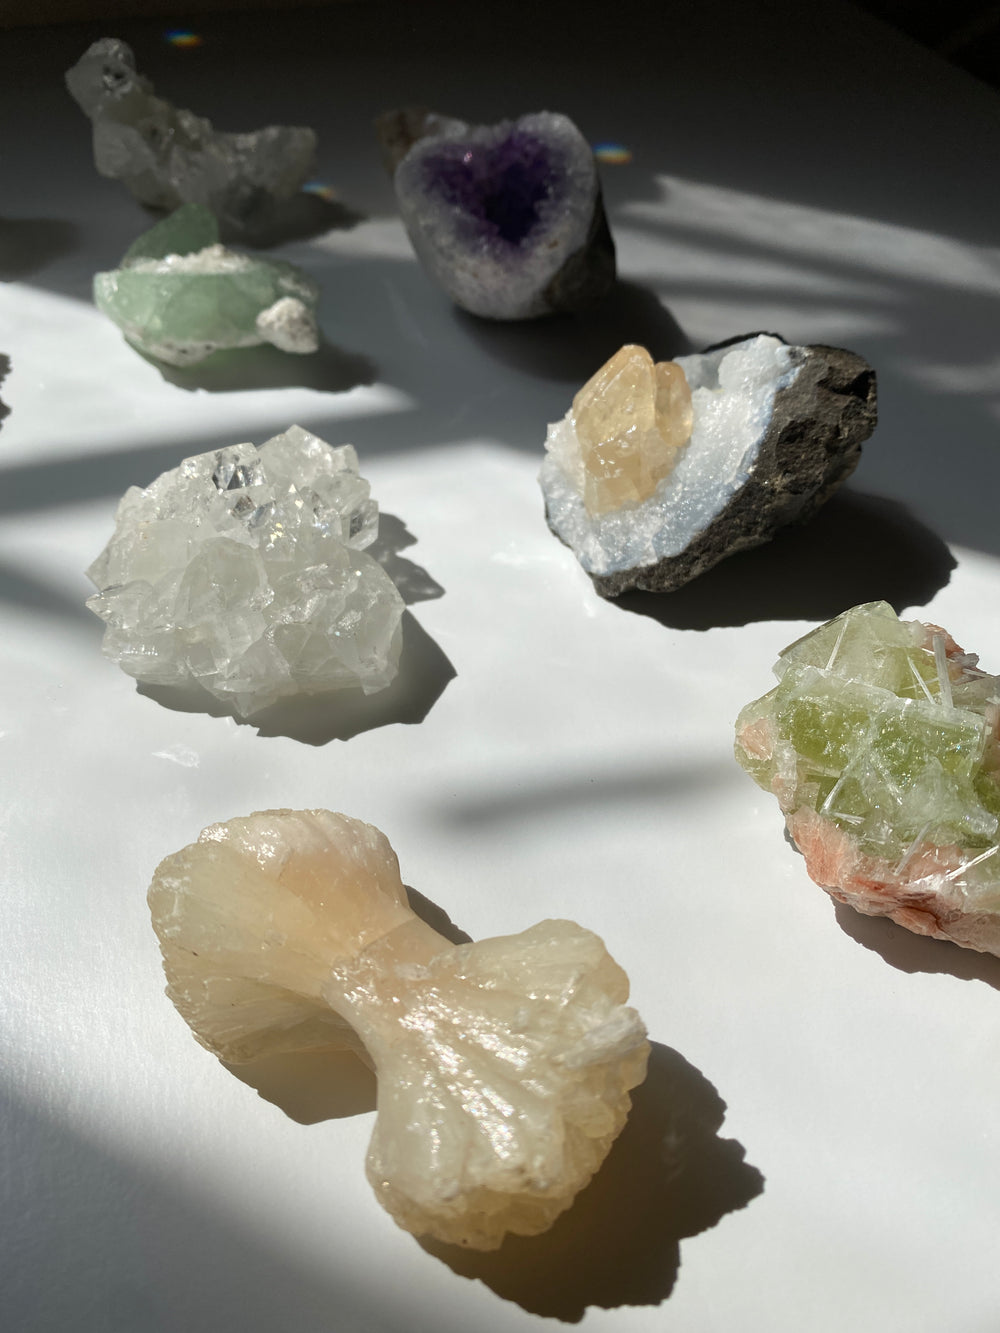 Healing crystals and practices